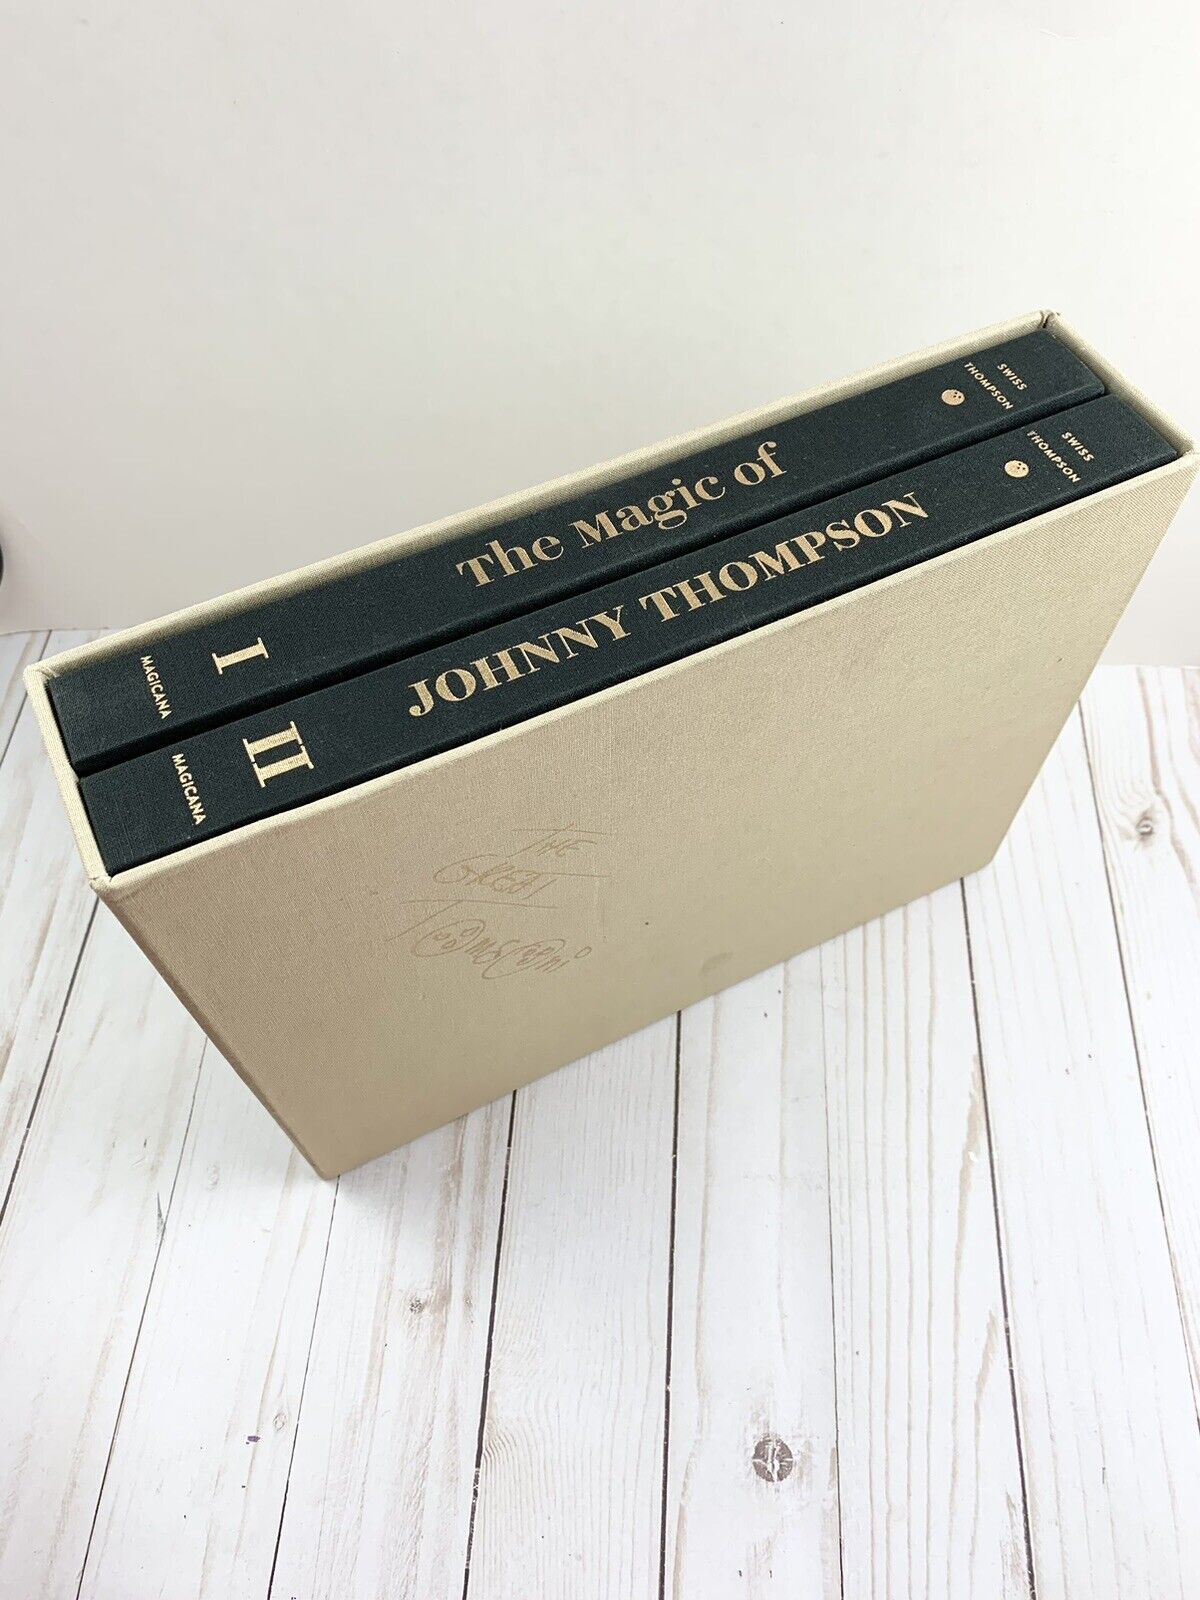 The Magic of Johnny Thompson Book 1st Ed Coins Cards Close-Up Stage Illusion